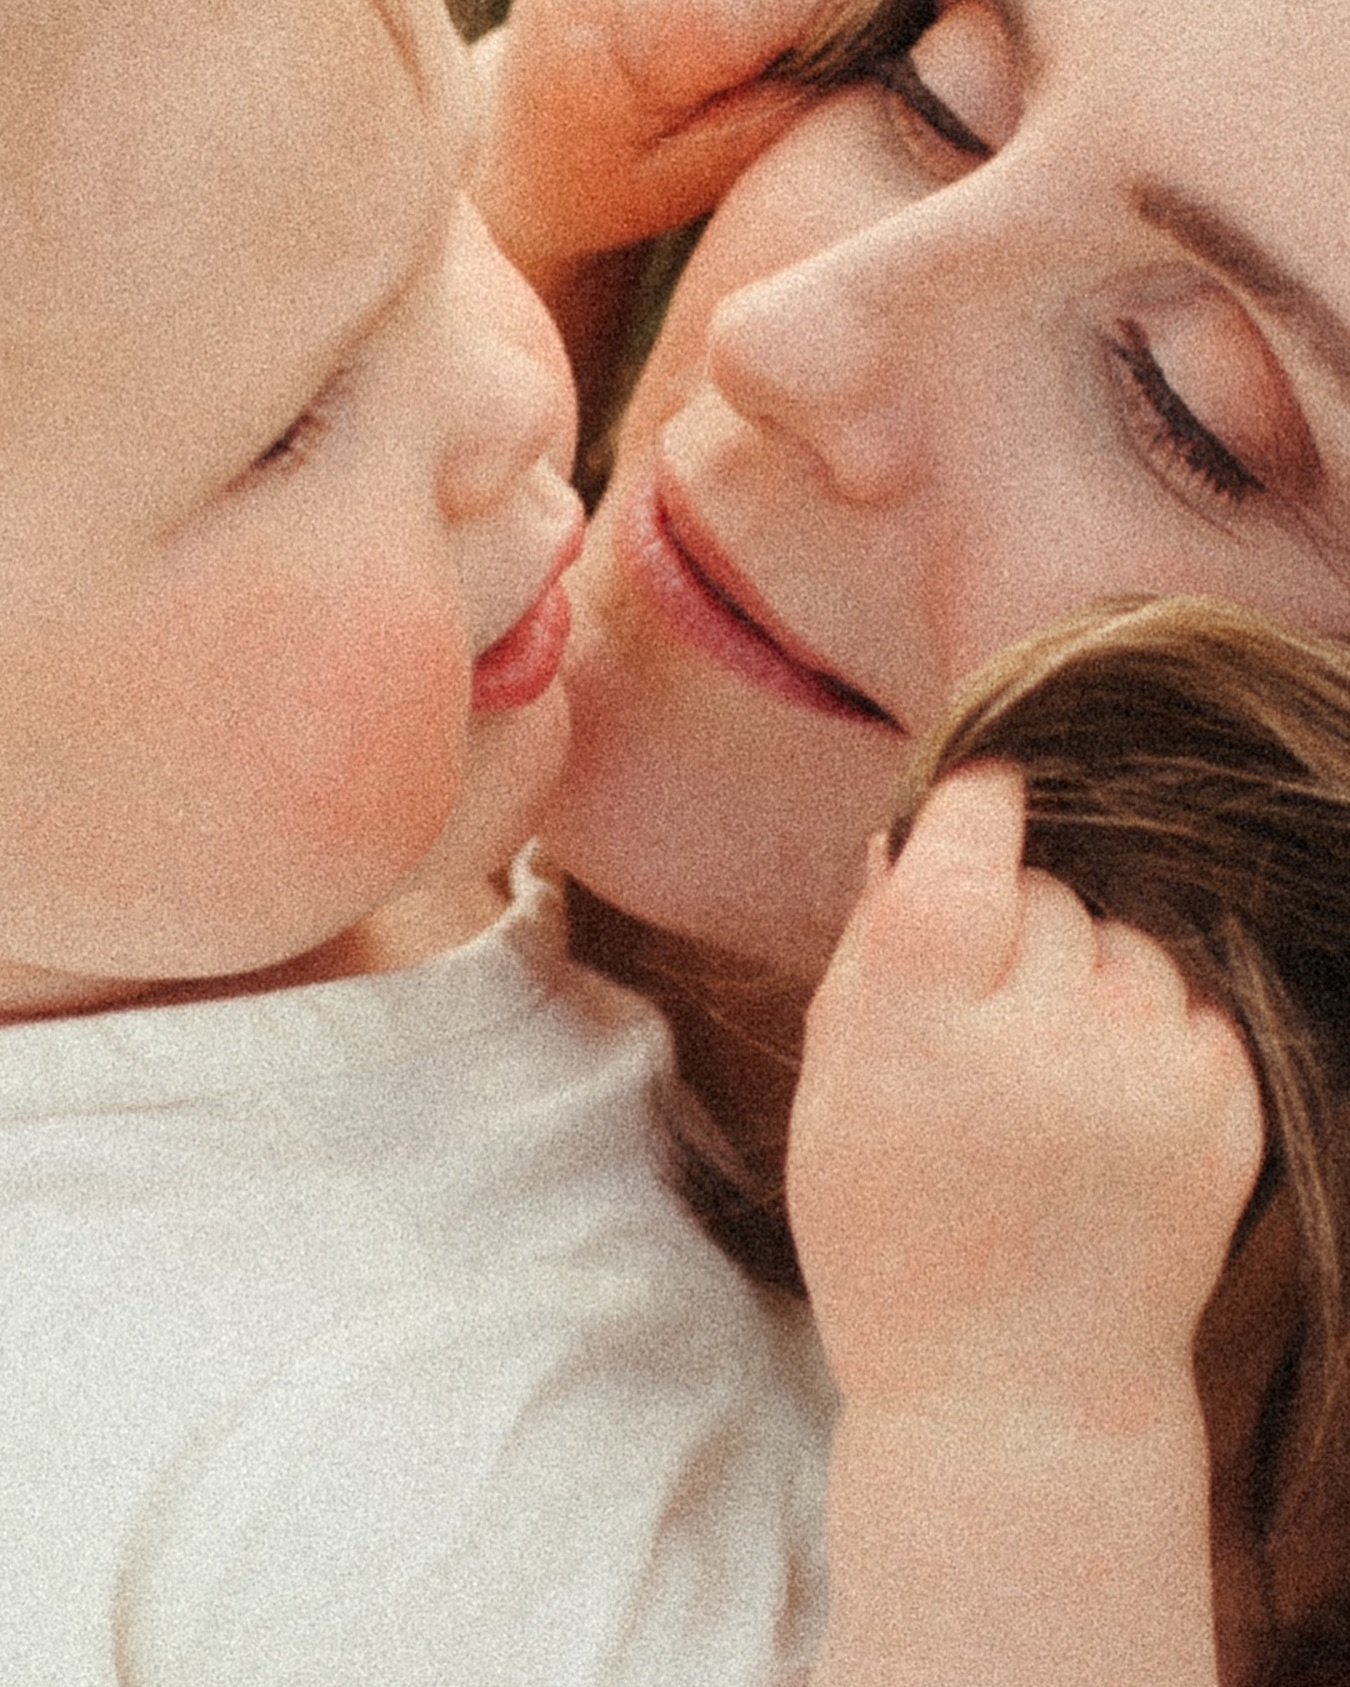 Can&rsquo;t wait to capture sweet little moments like this at my motherhood mini sessions this weekend!